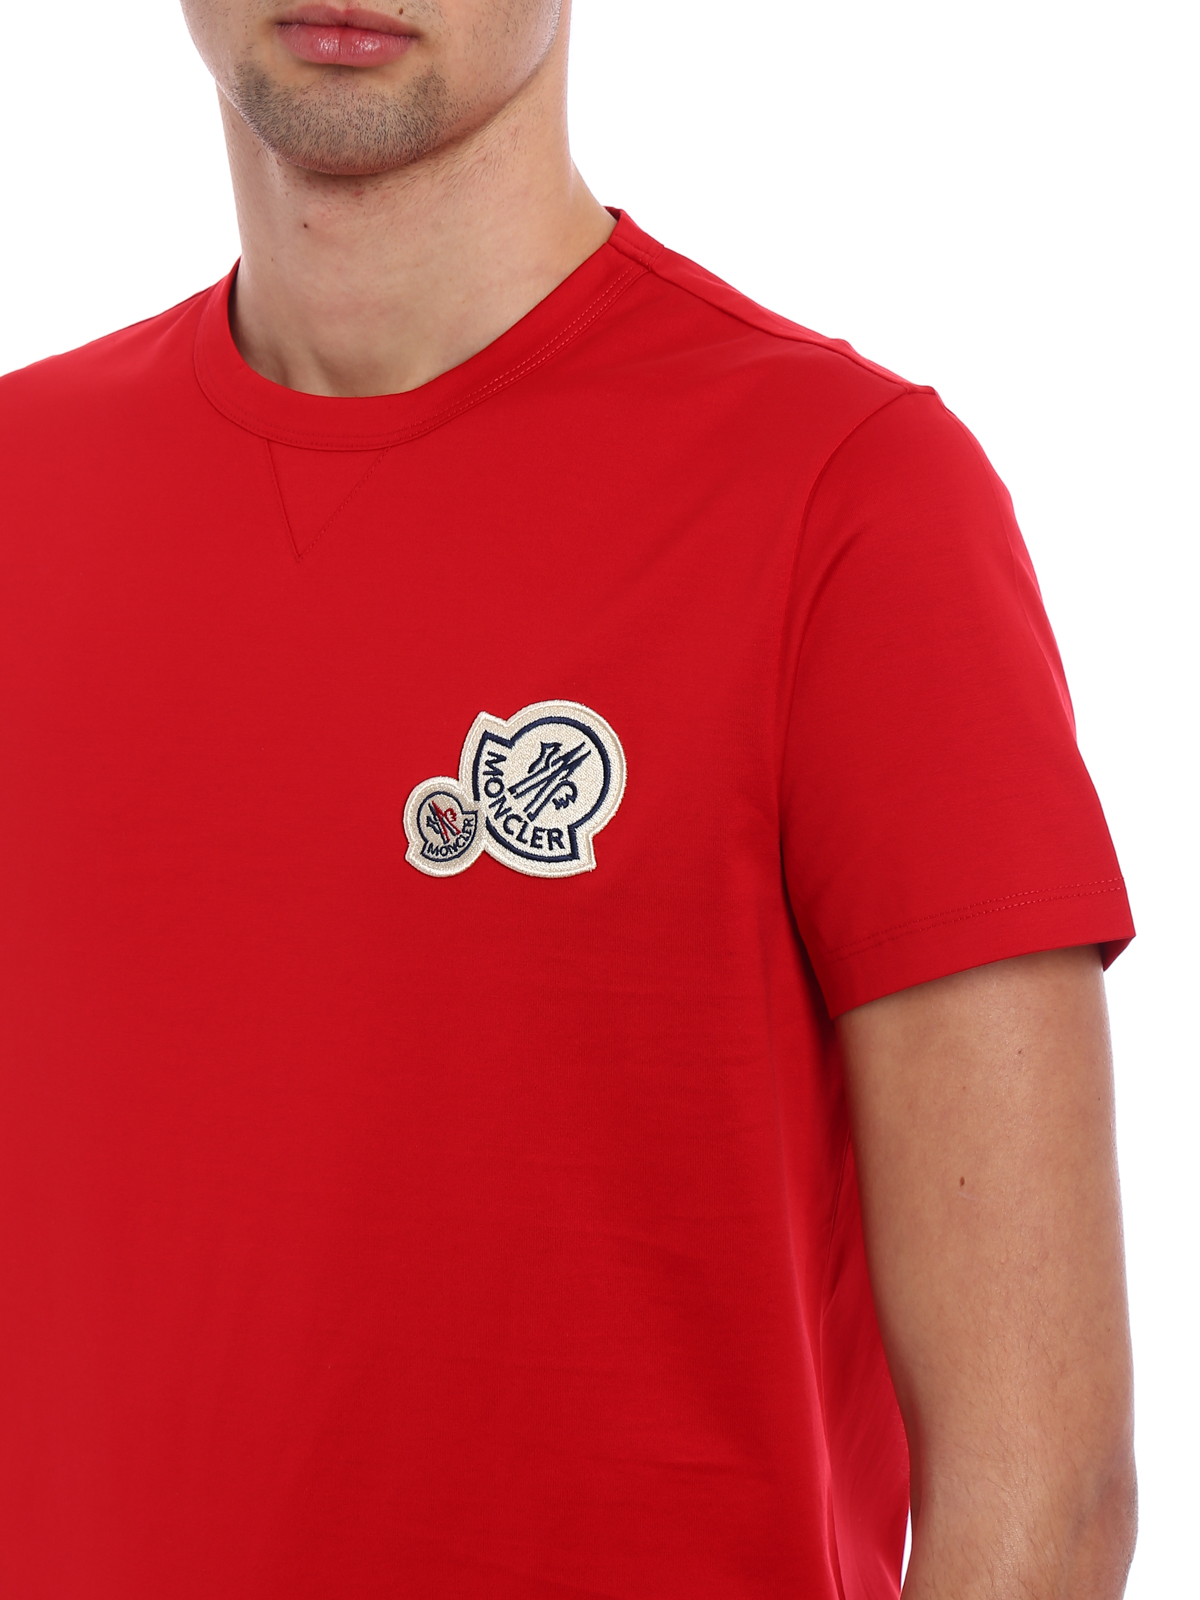 mens red moncler t shirt, OFF 79%,Free 